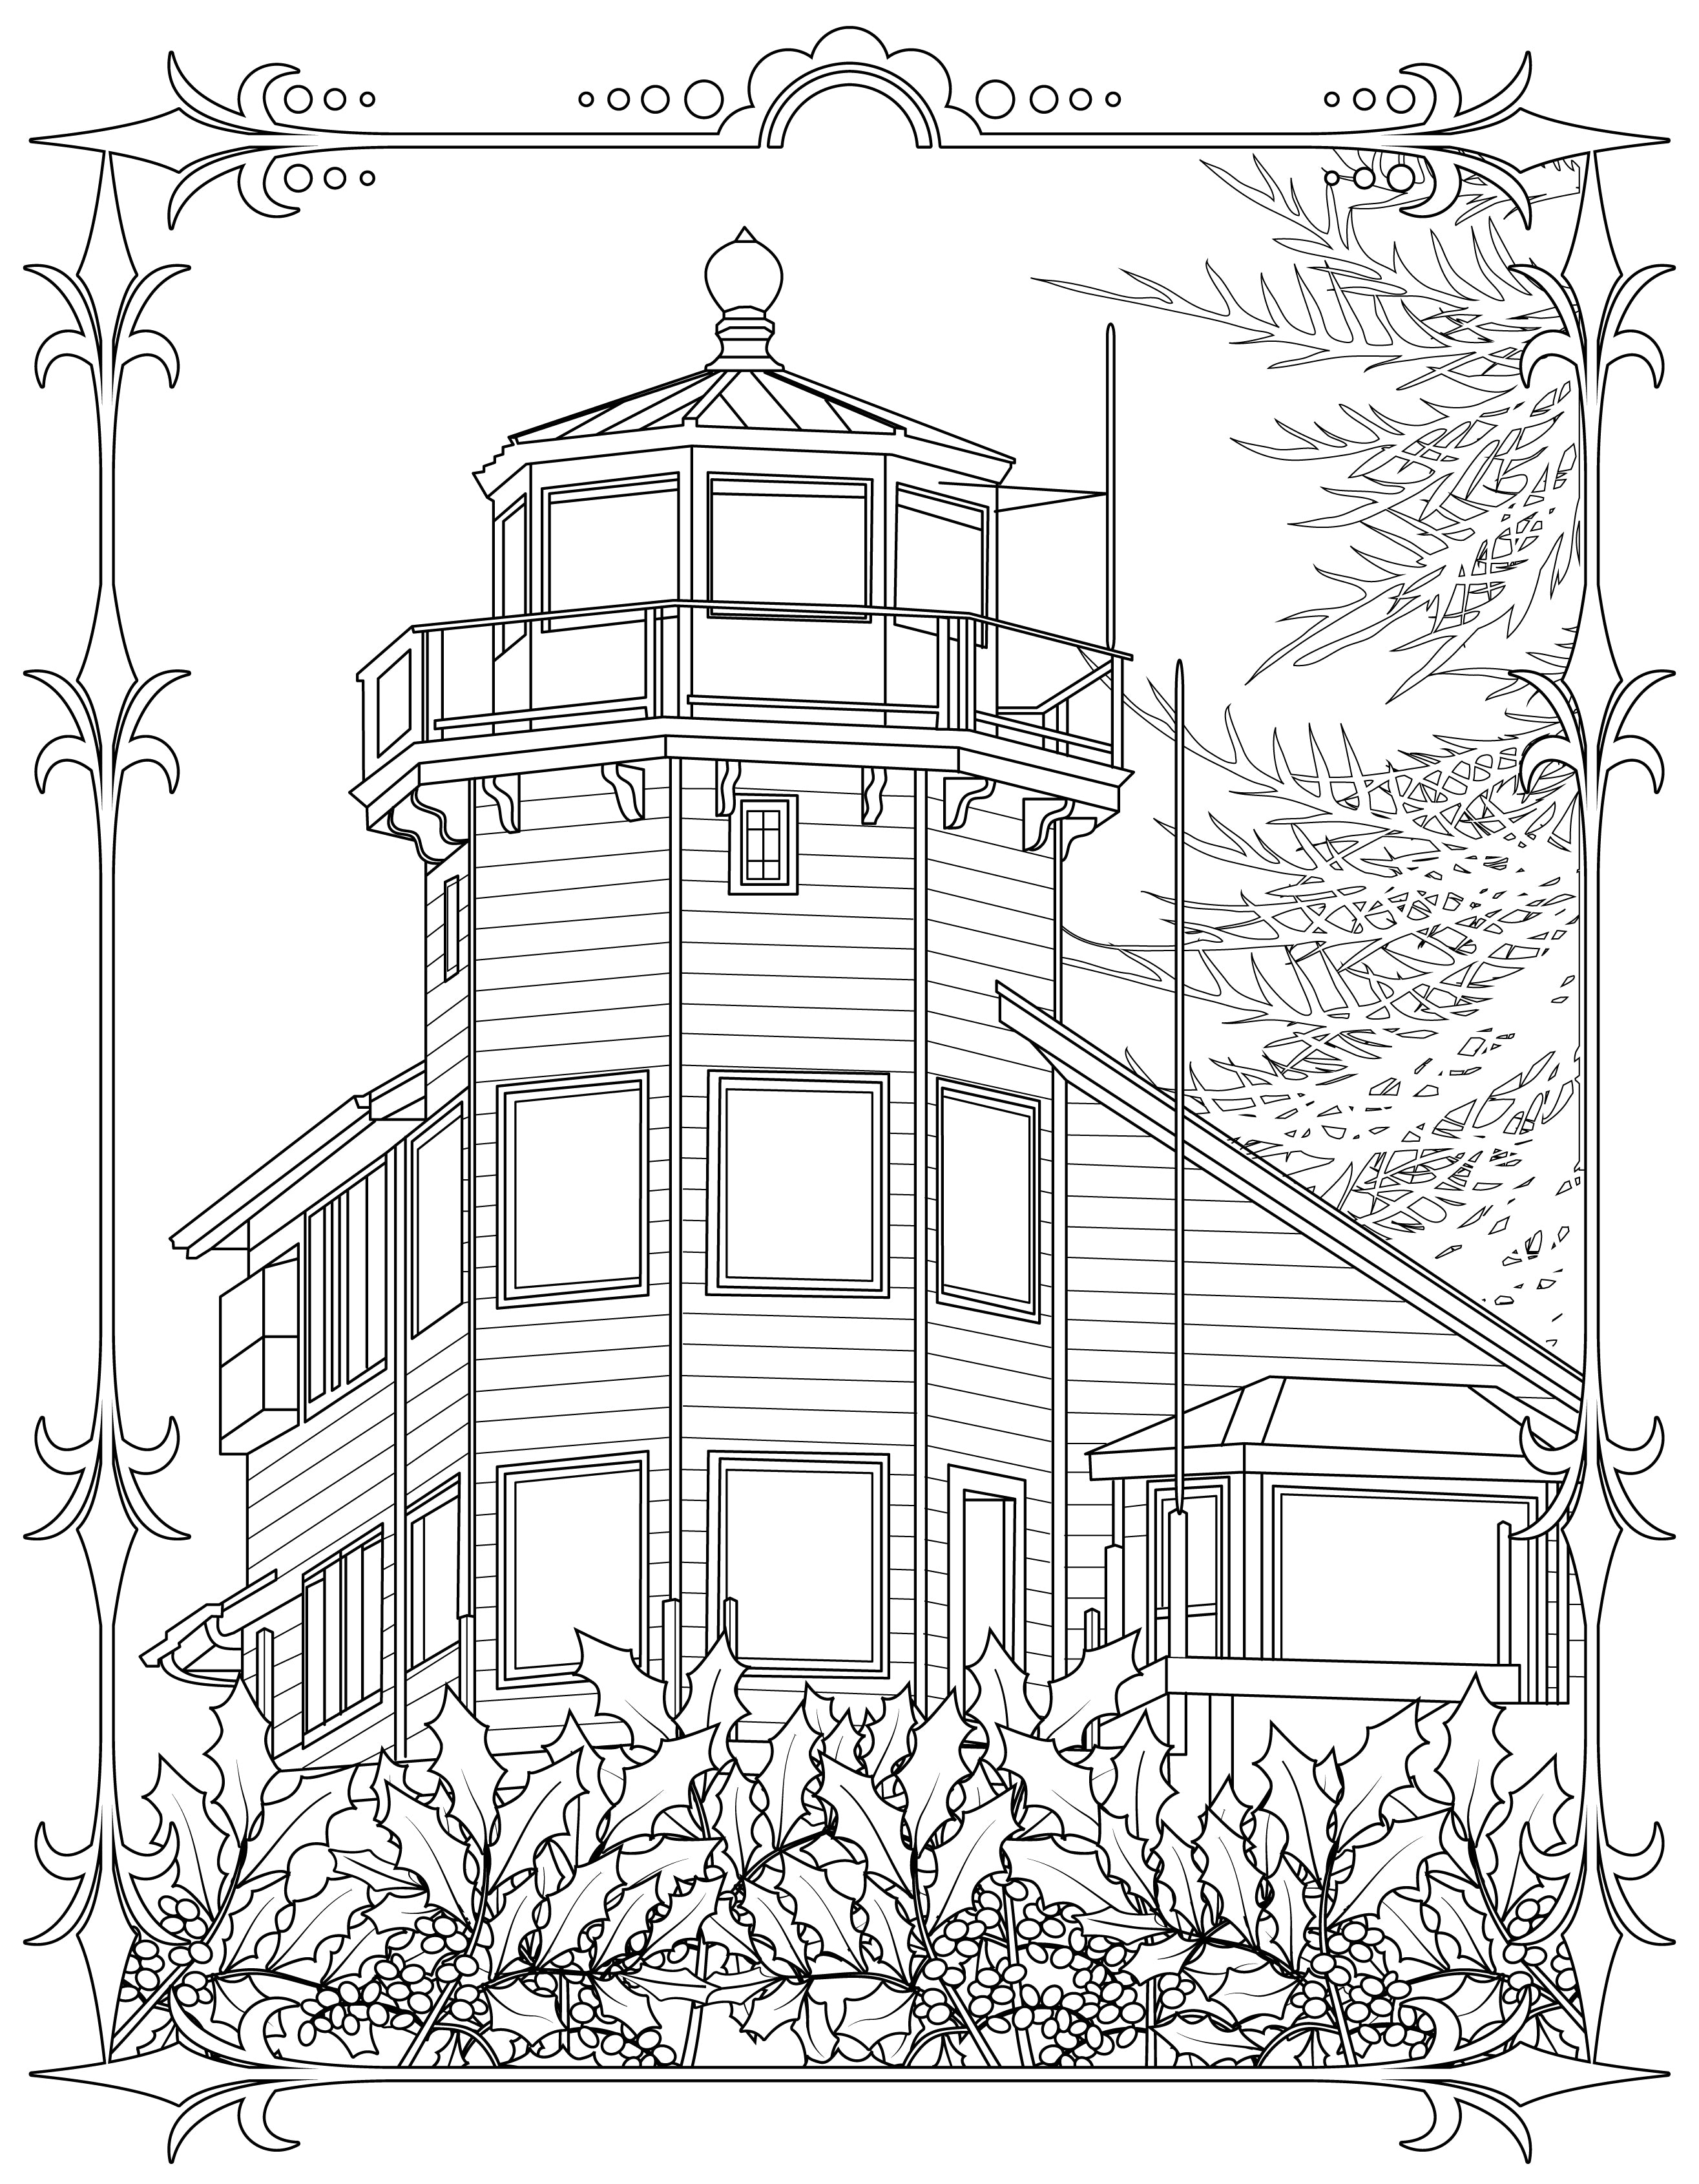 Single Coloring Book Page - Pelican Bay Lighthouse, Oregon - Digital Print-from-Home